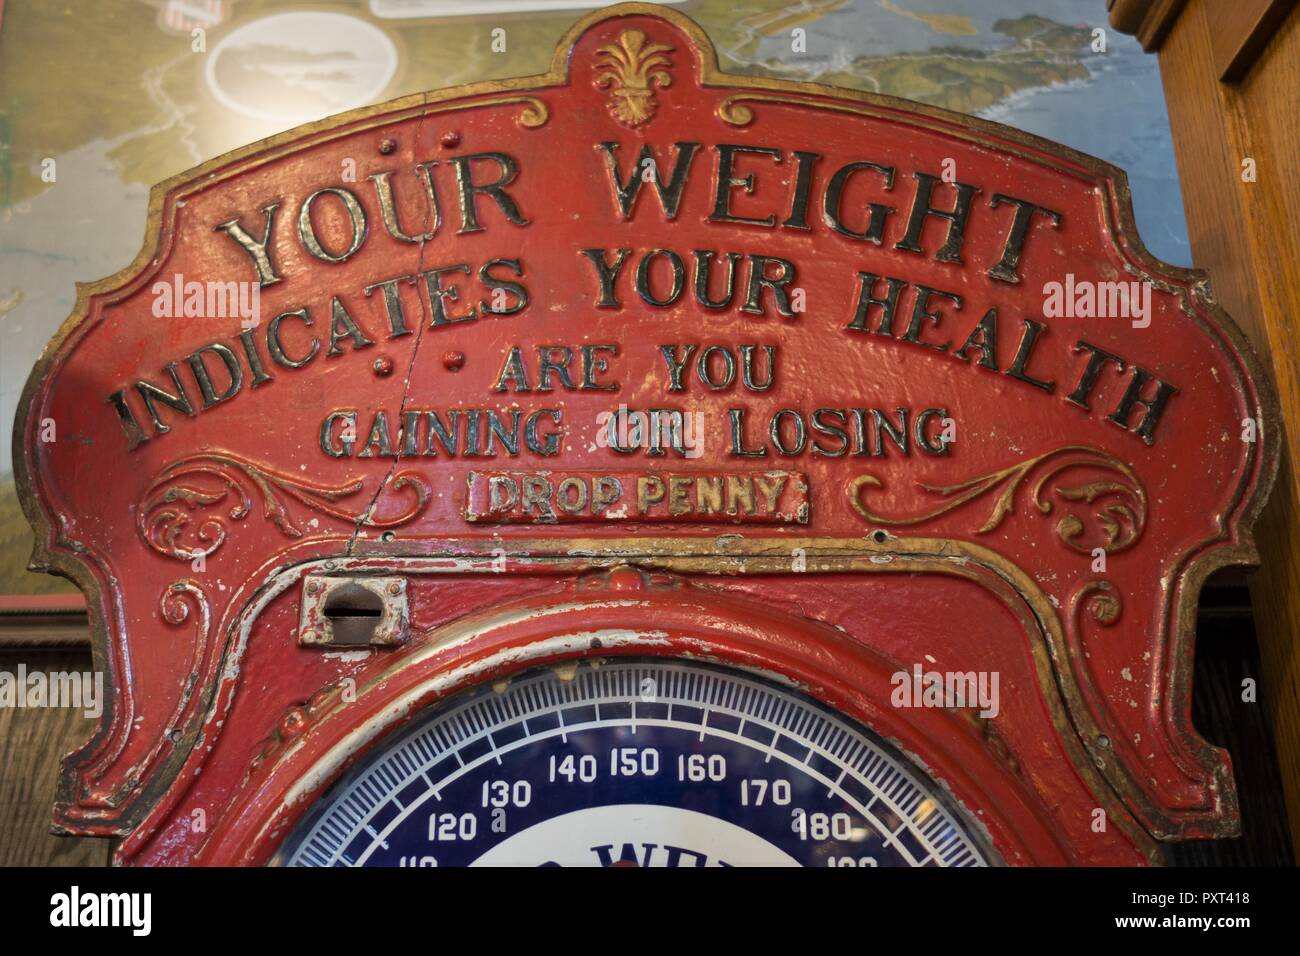 Antique coin operated scale at Marsh's Free Museum in Long Beach, Washington, USA. Stock Photo